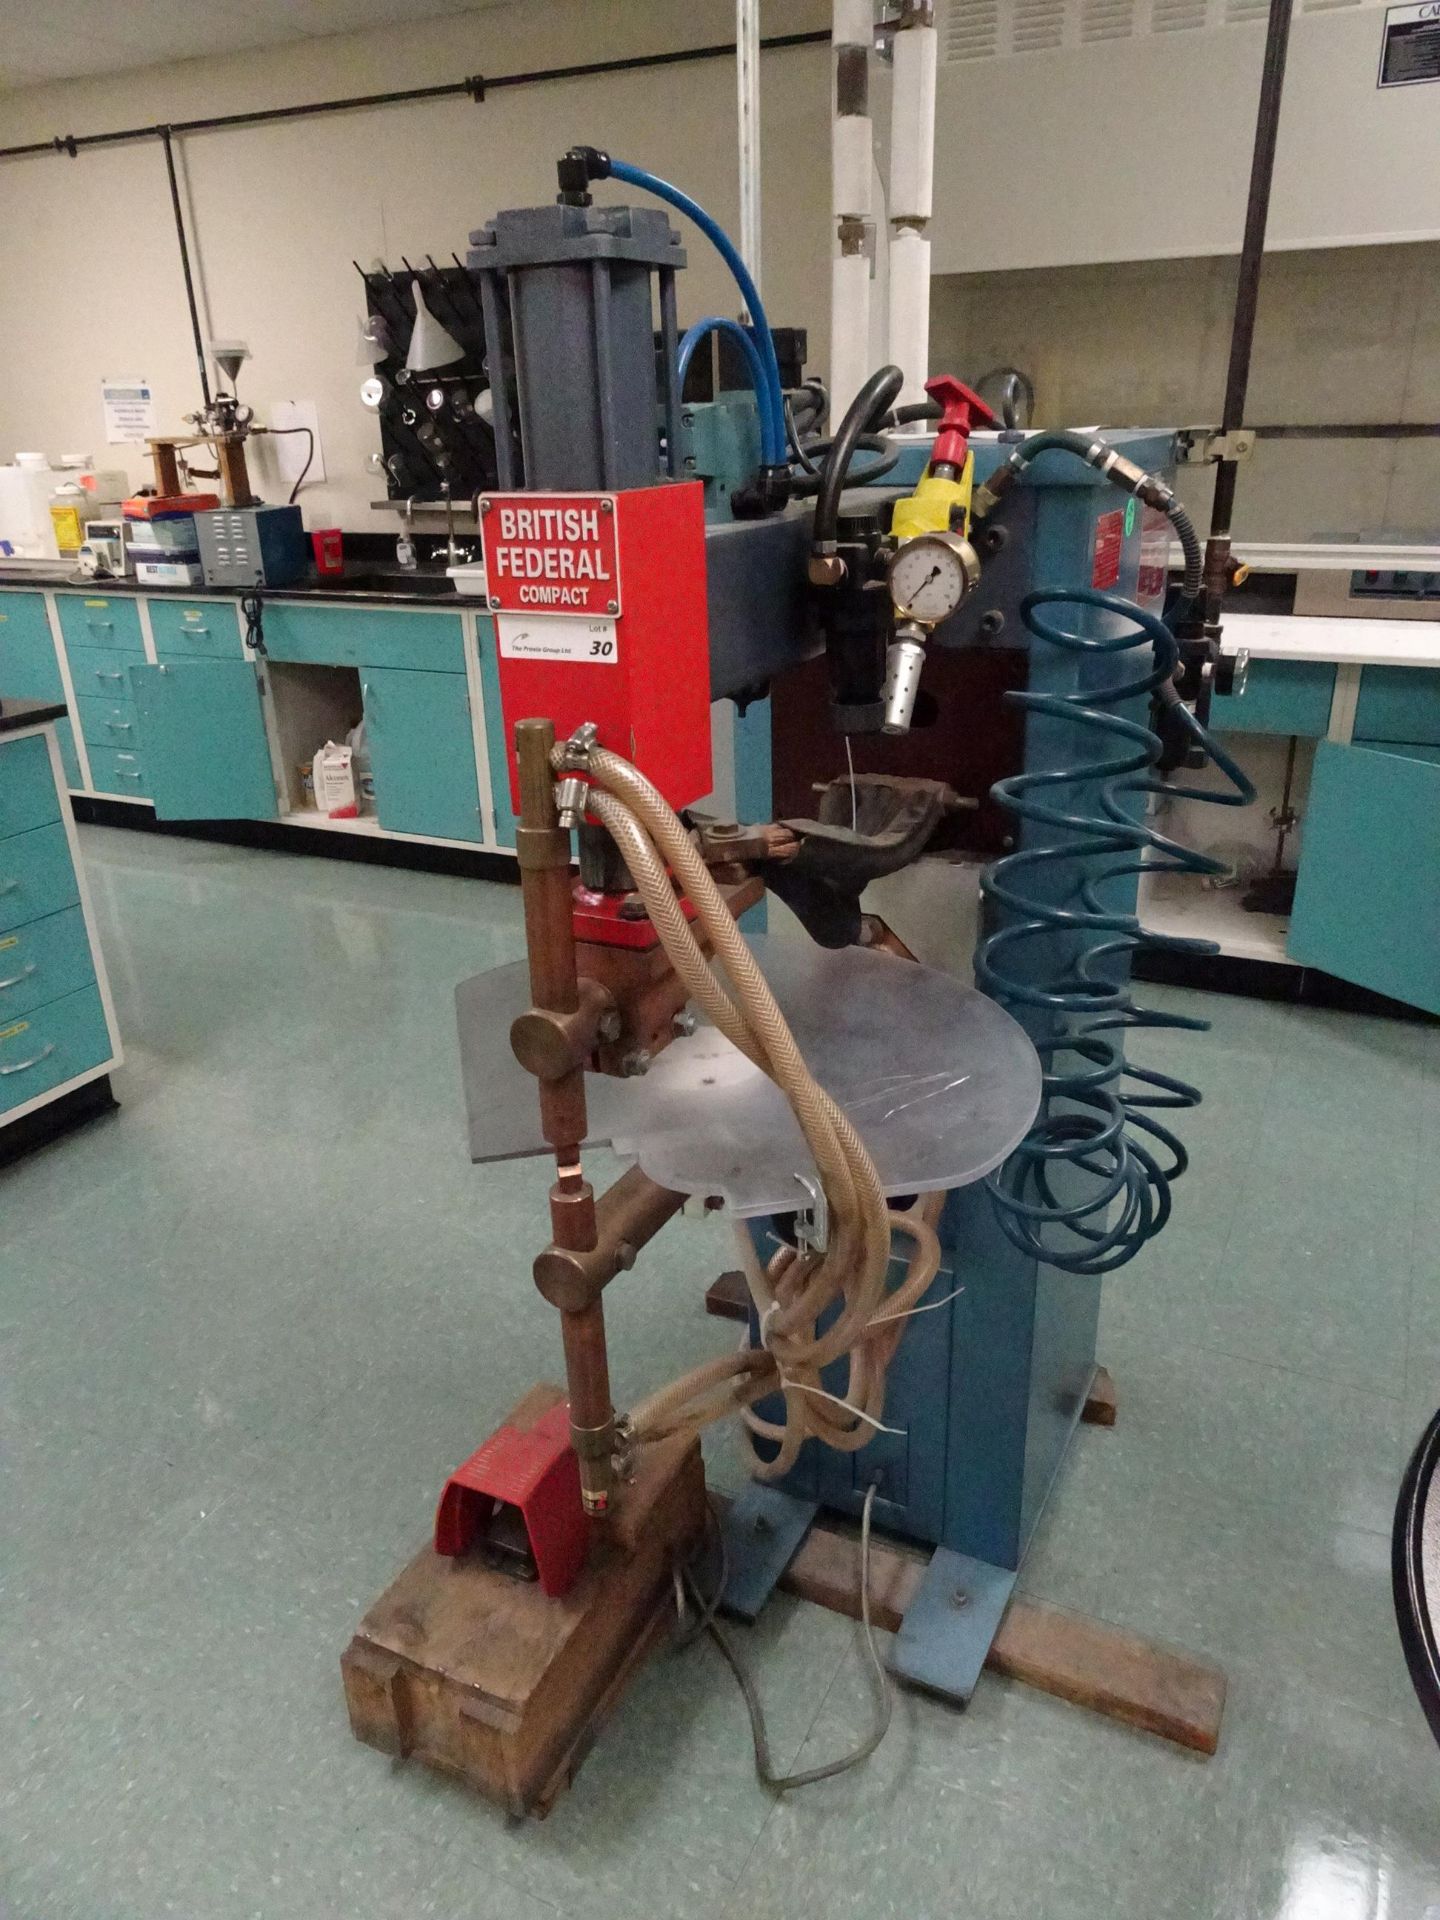 British Federal Stronghold Pedestal Spot Welder With Foot Pedal Controls, Tr Number 45395, 25 KVA, - Image 2 of 5